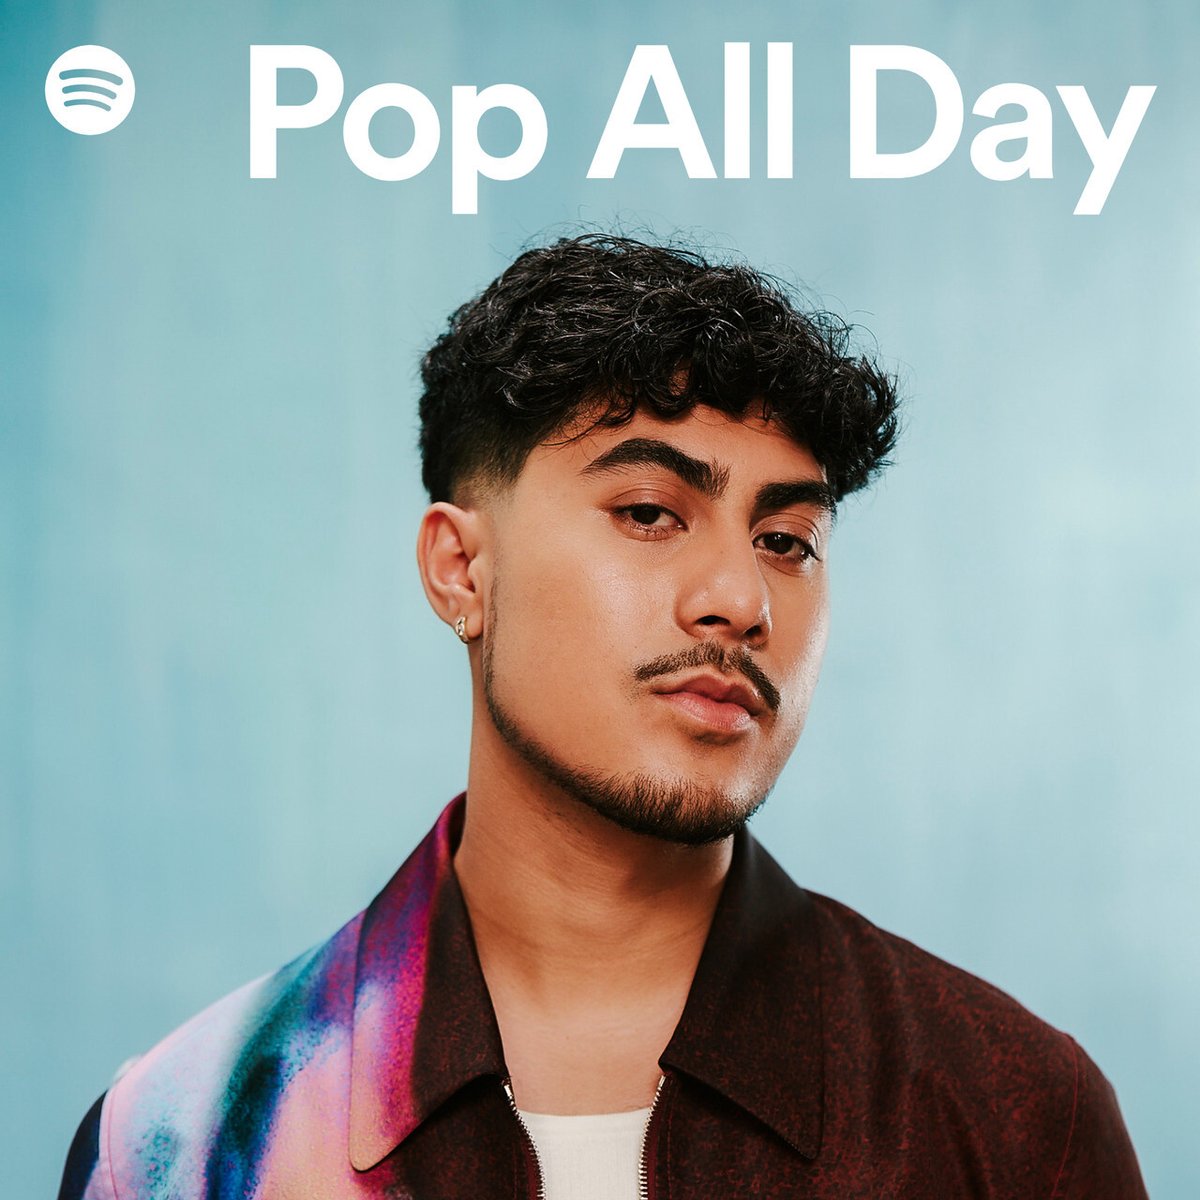 Dance Alone streaming now on Pop All Day ❕❕❕ thank u @Spotify 🩶 bit.ly/3TehSt4